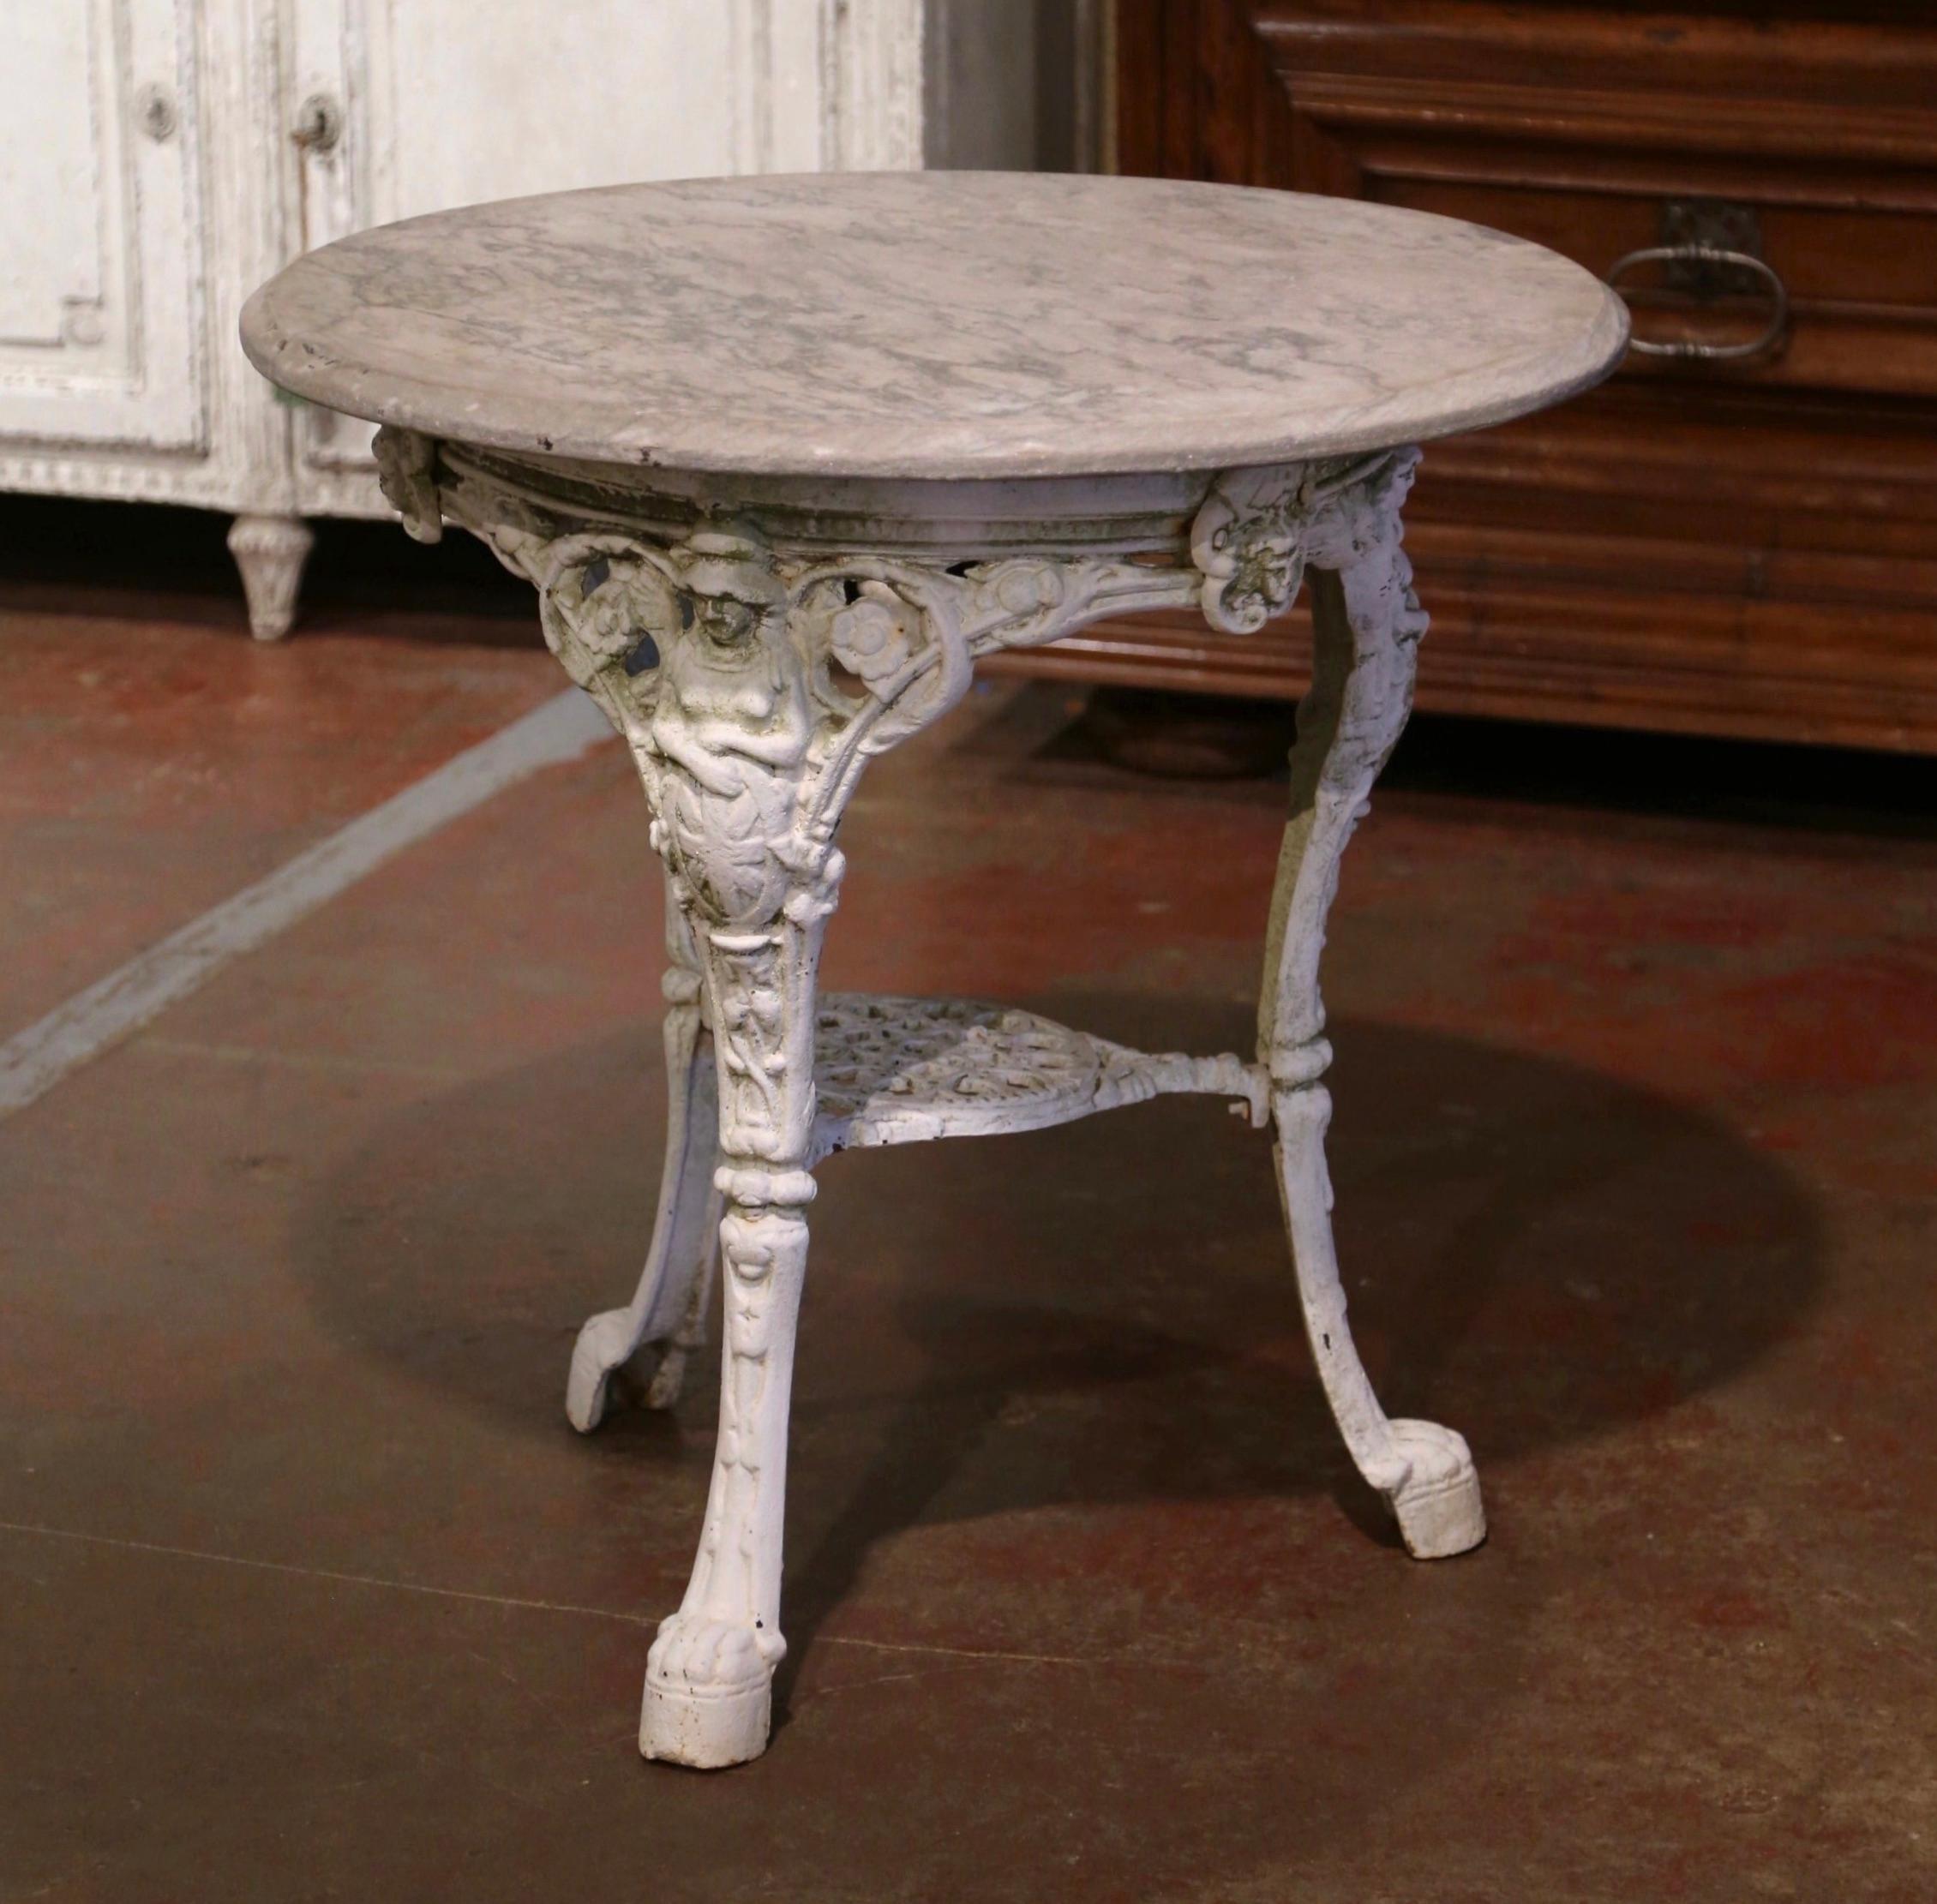 Hand-Crafted 19th Century English Round Marble Top Painted Iron Outdoor Garden Bistrot Table 